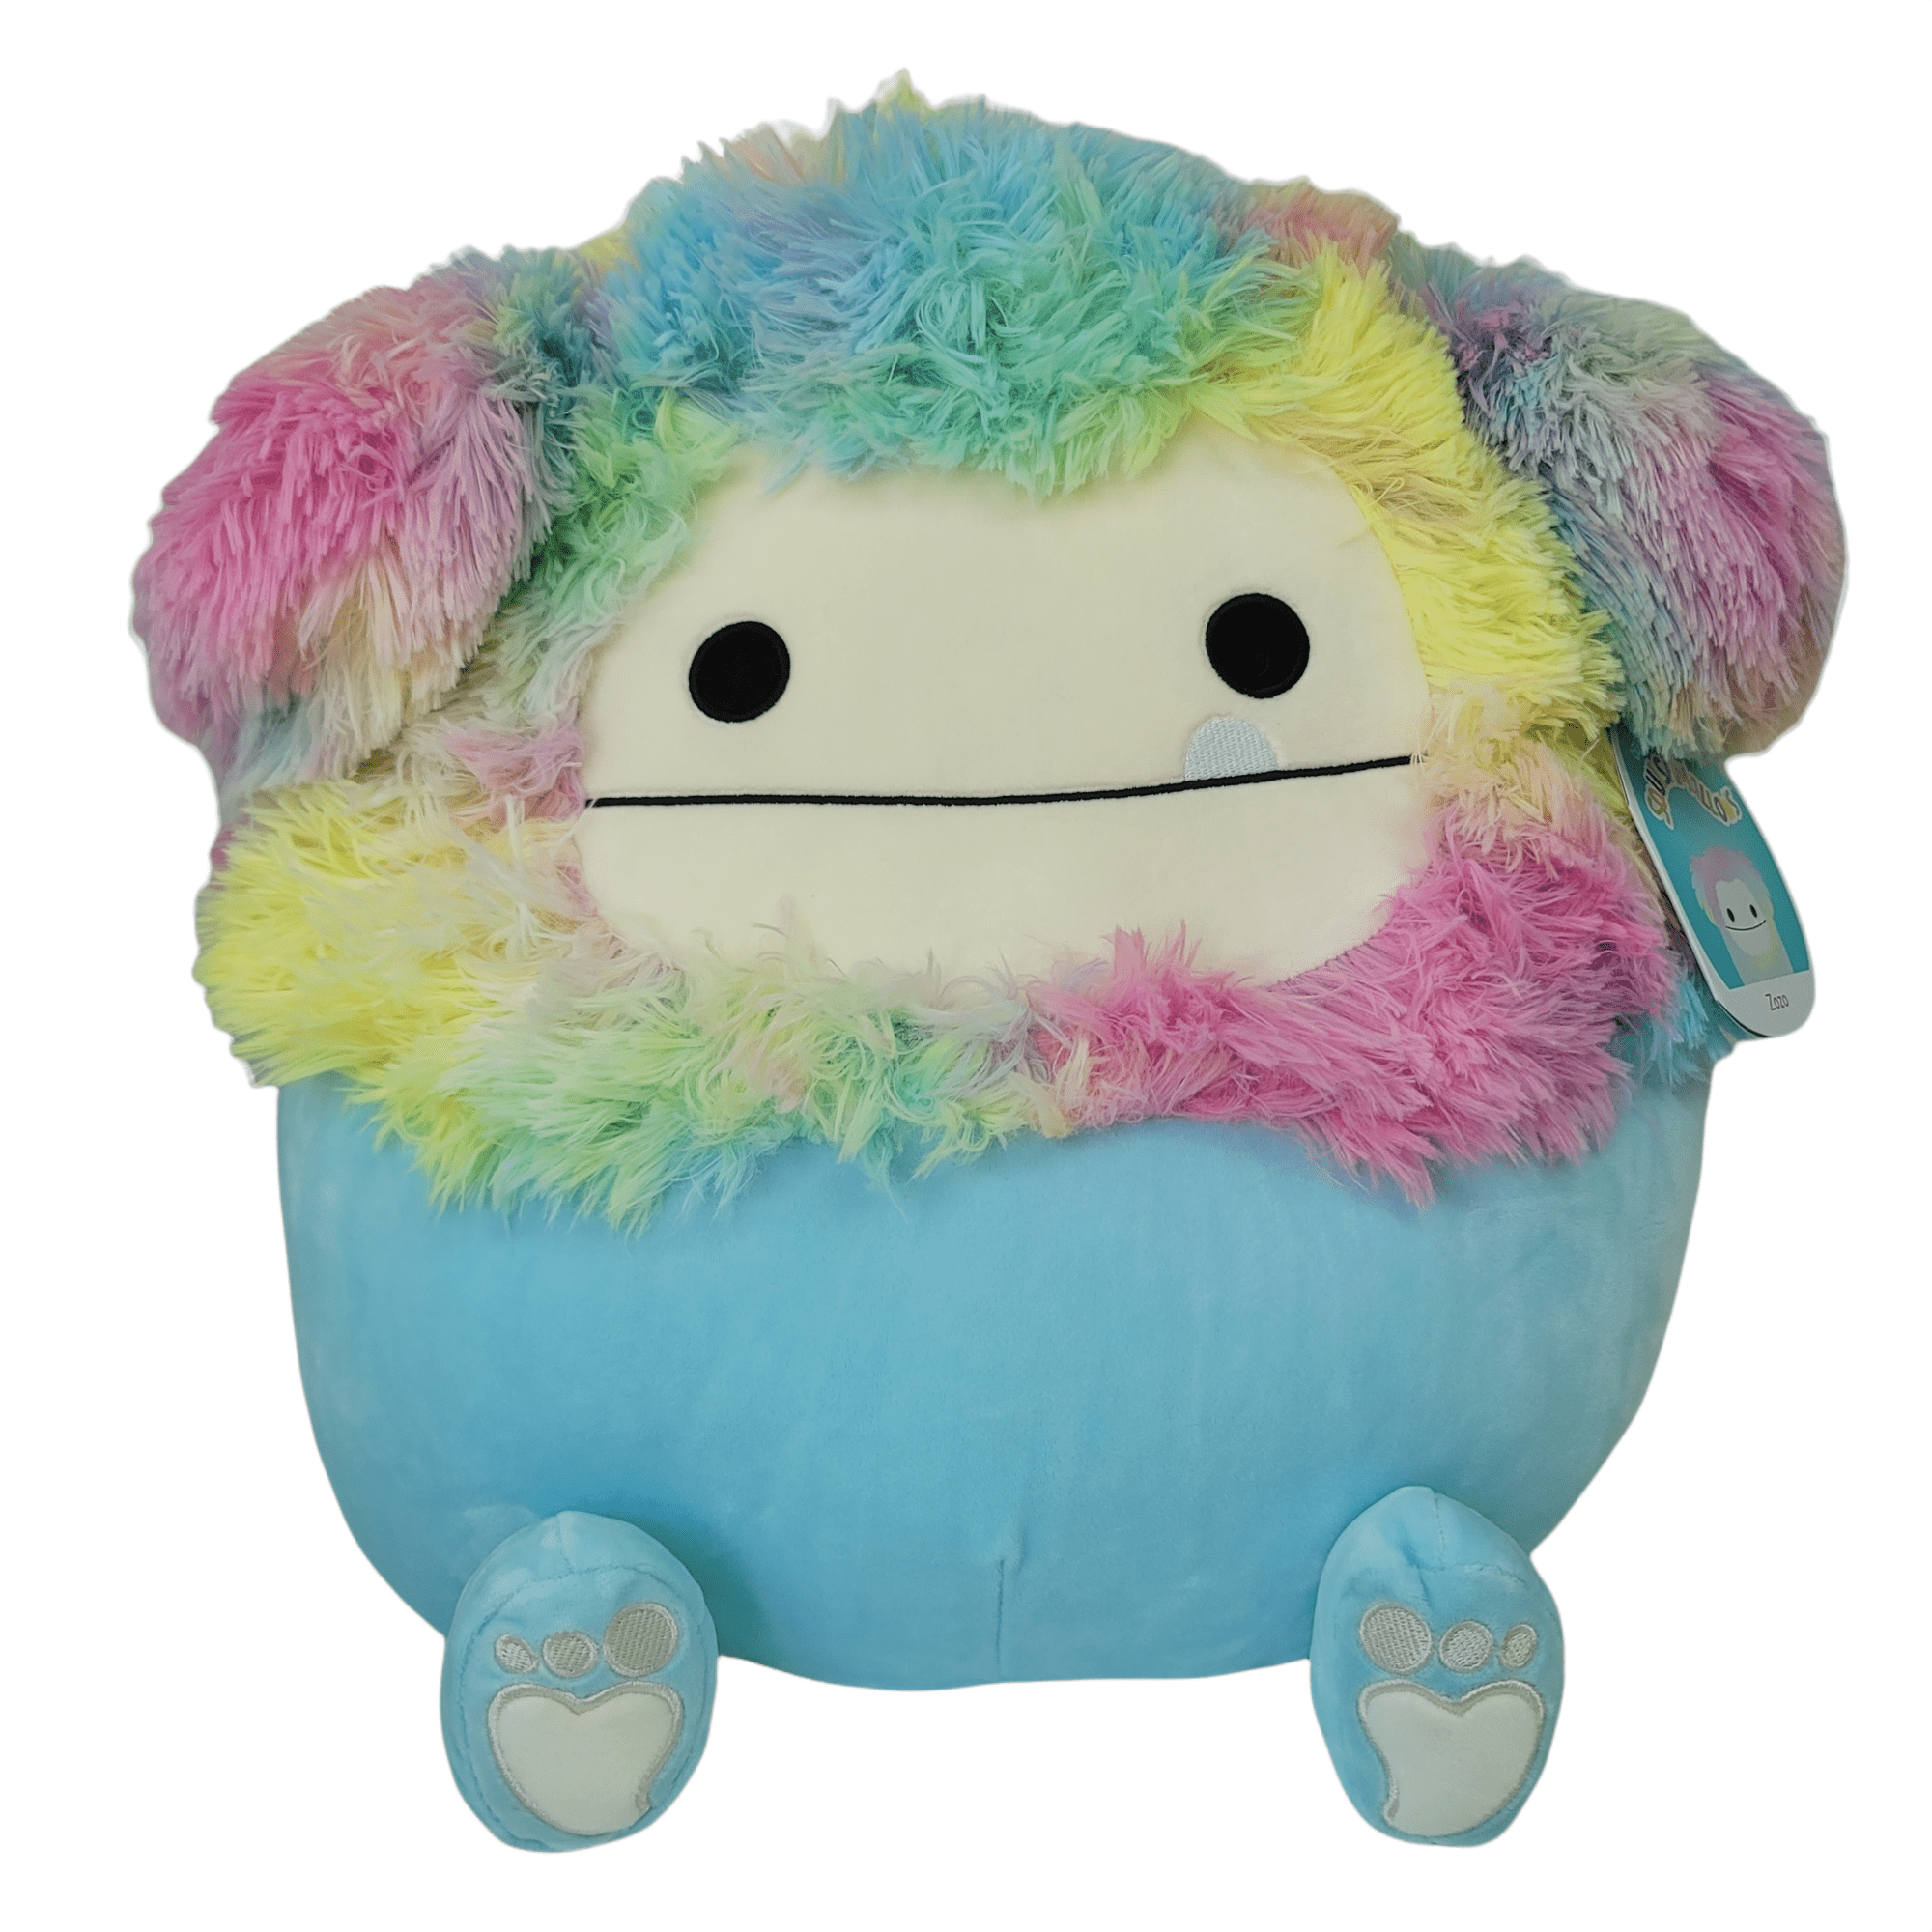 Squishmallows 5" Zozo The Bigfoot With Tags Kellytoy Plush Brand New With Tags 